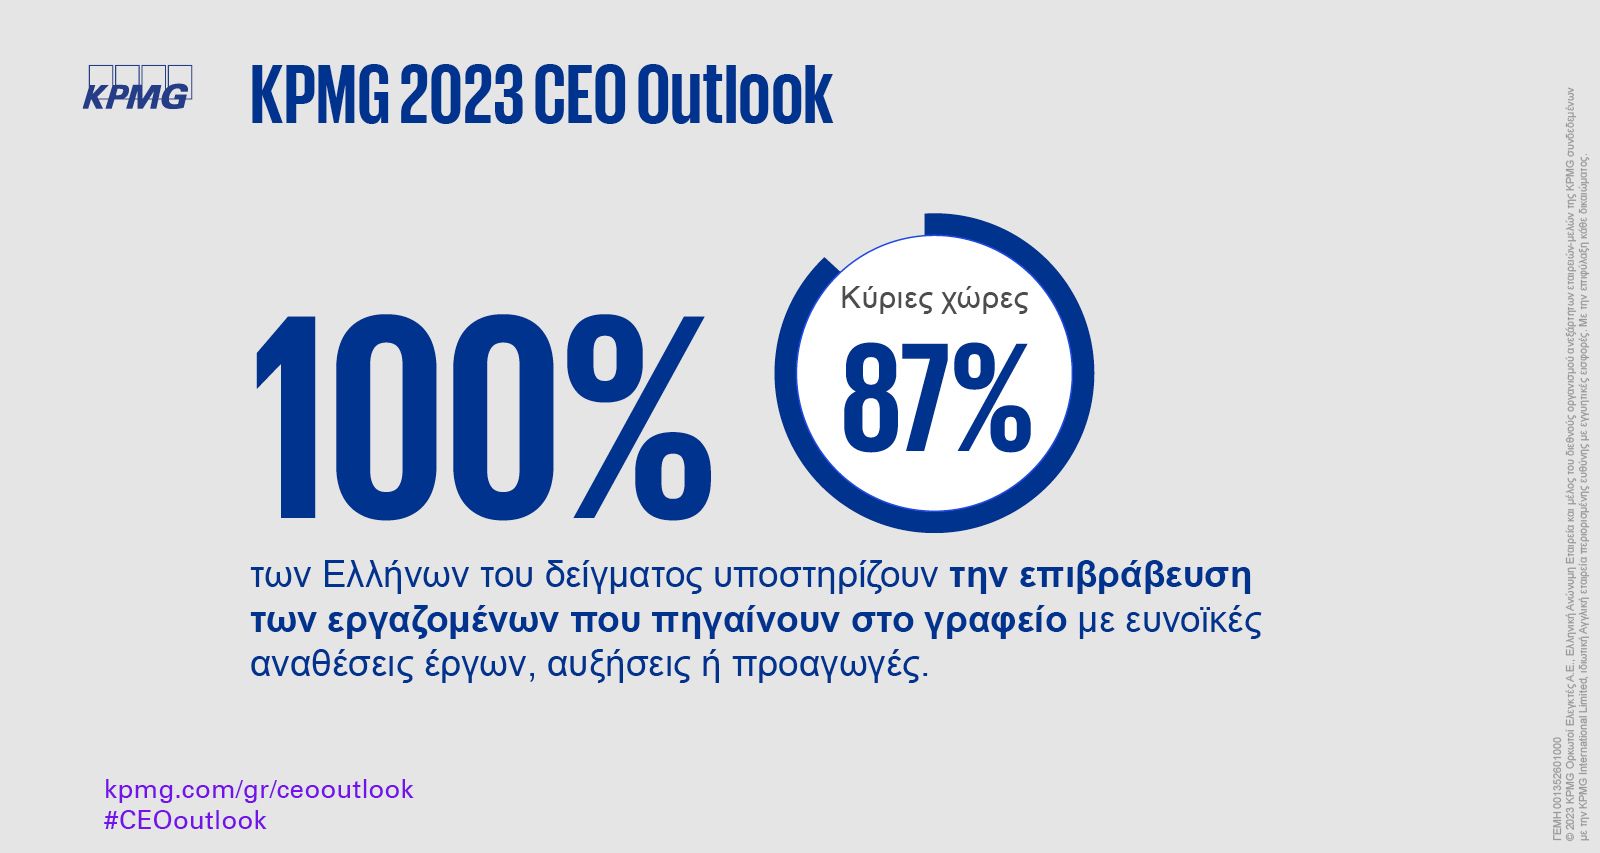 2023 CEO Outlook infographic